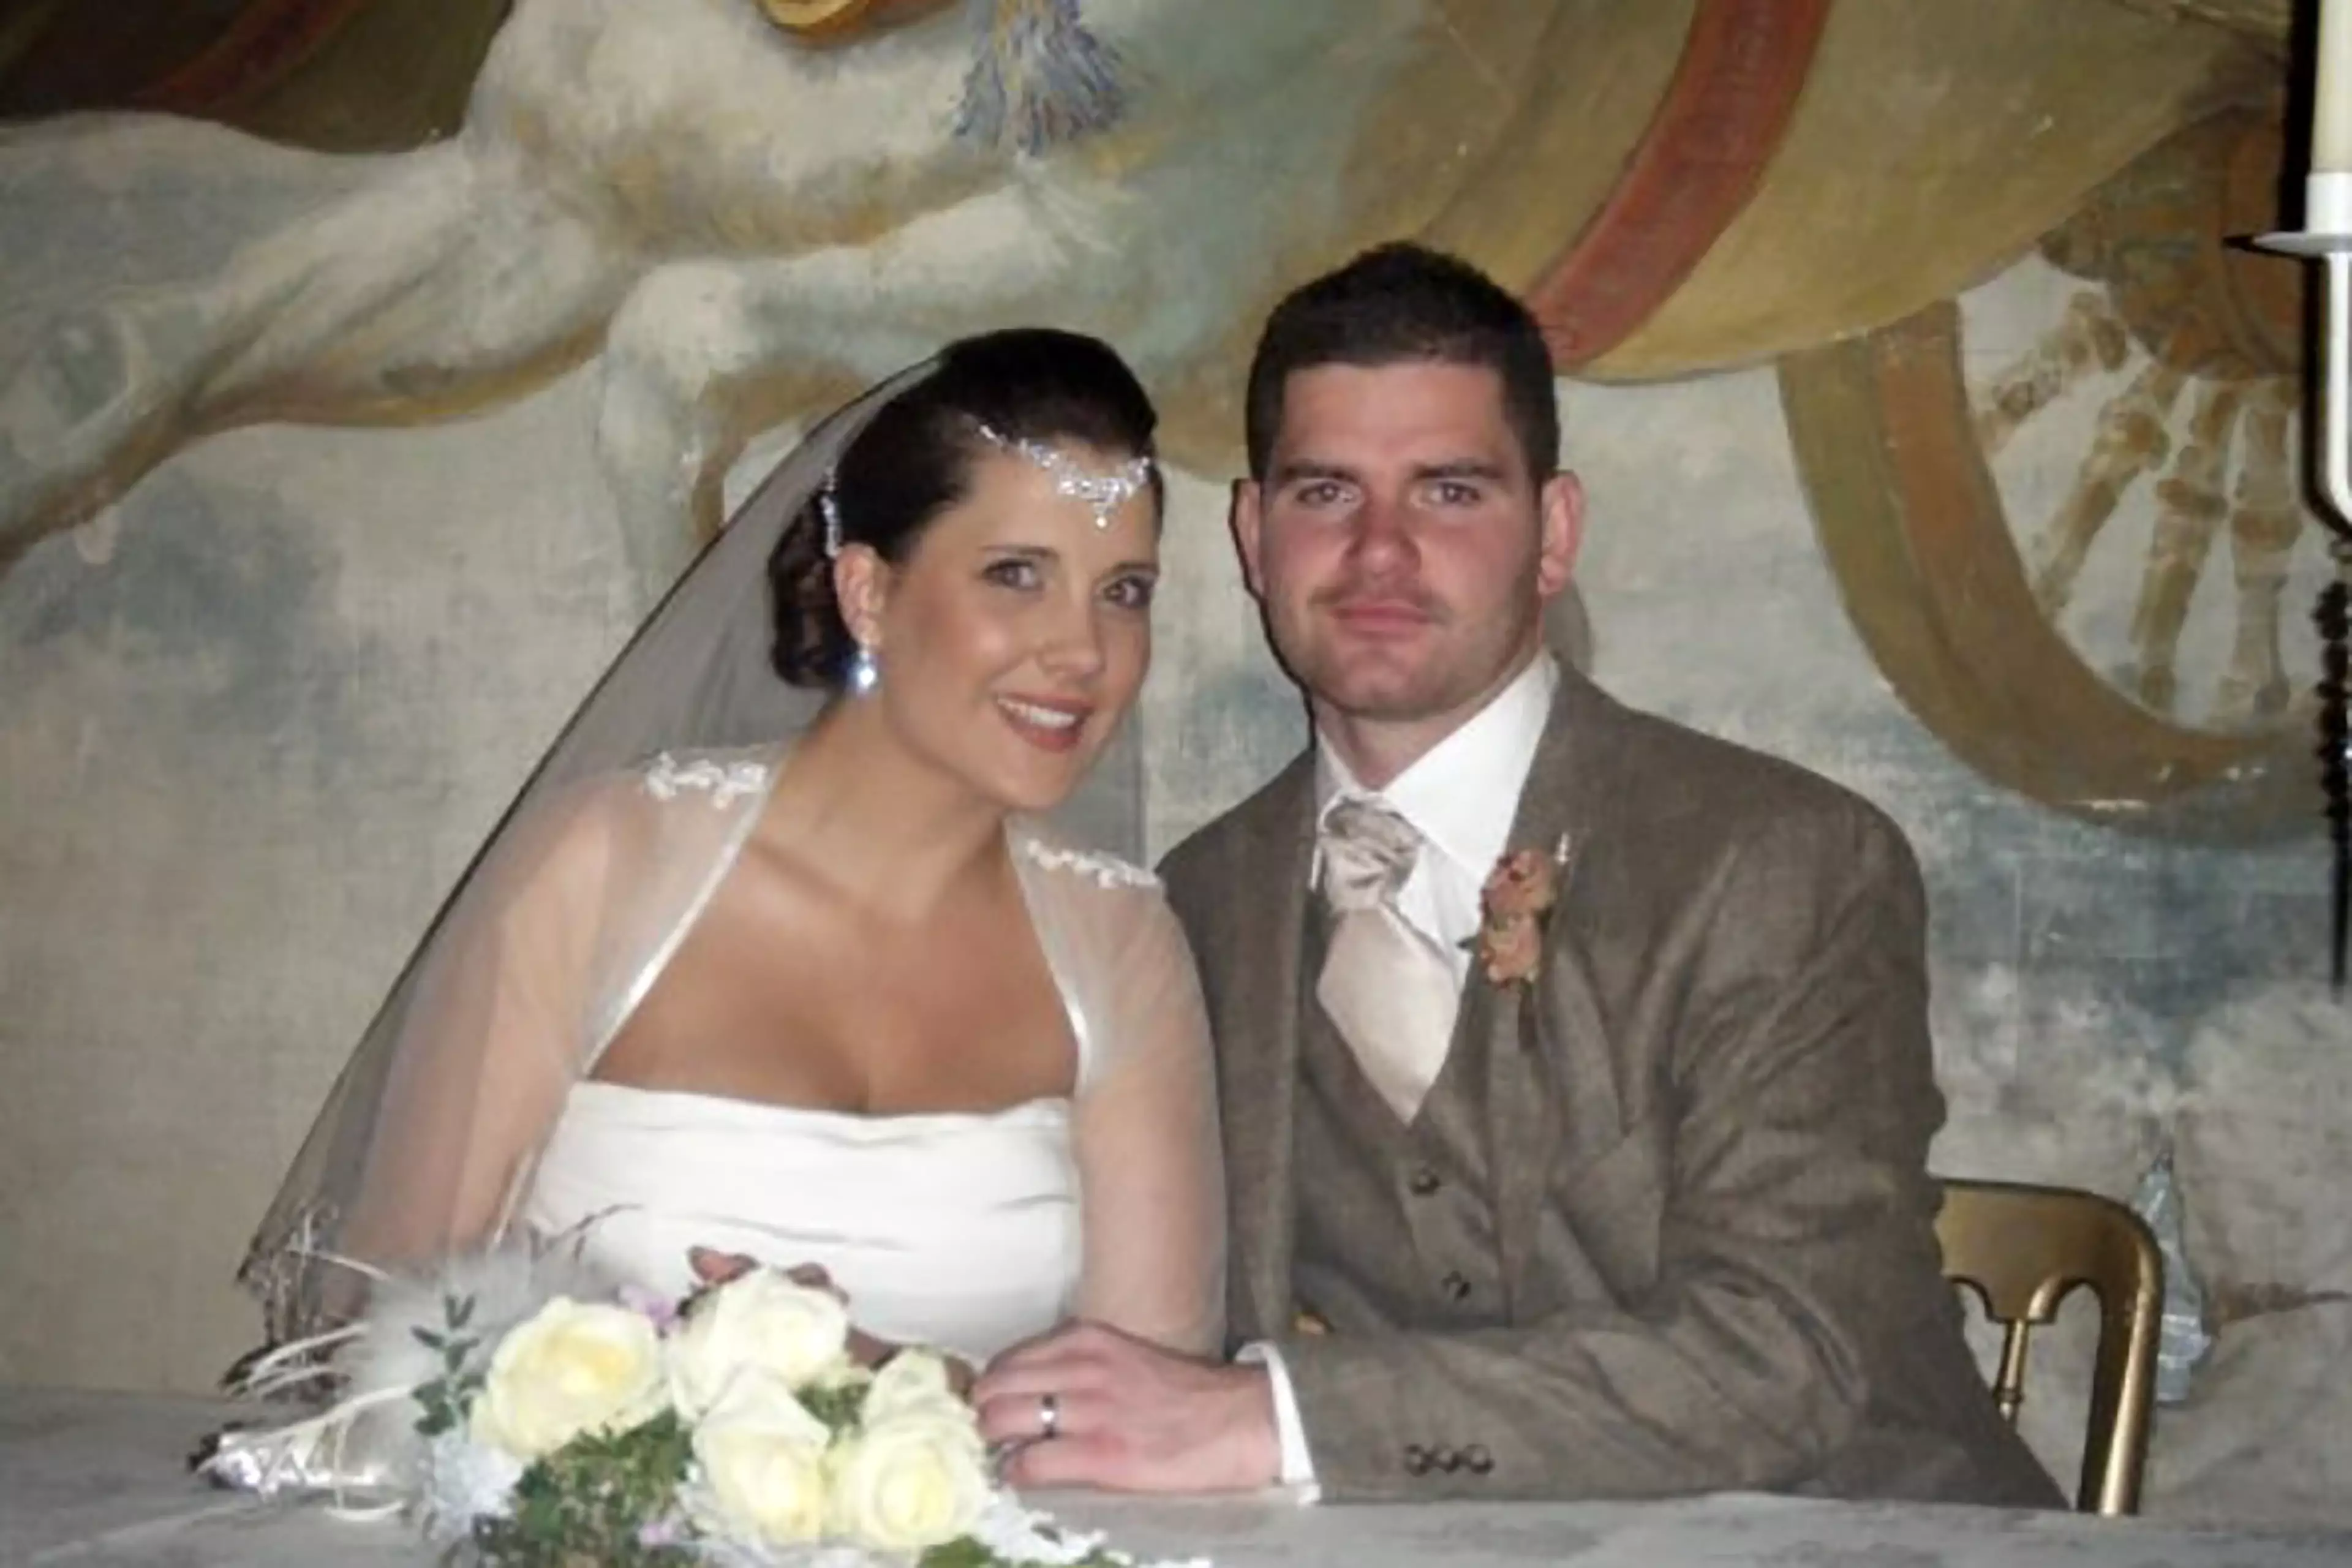 The couple's first wedding was marred by family drama (